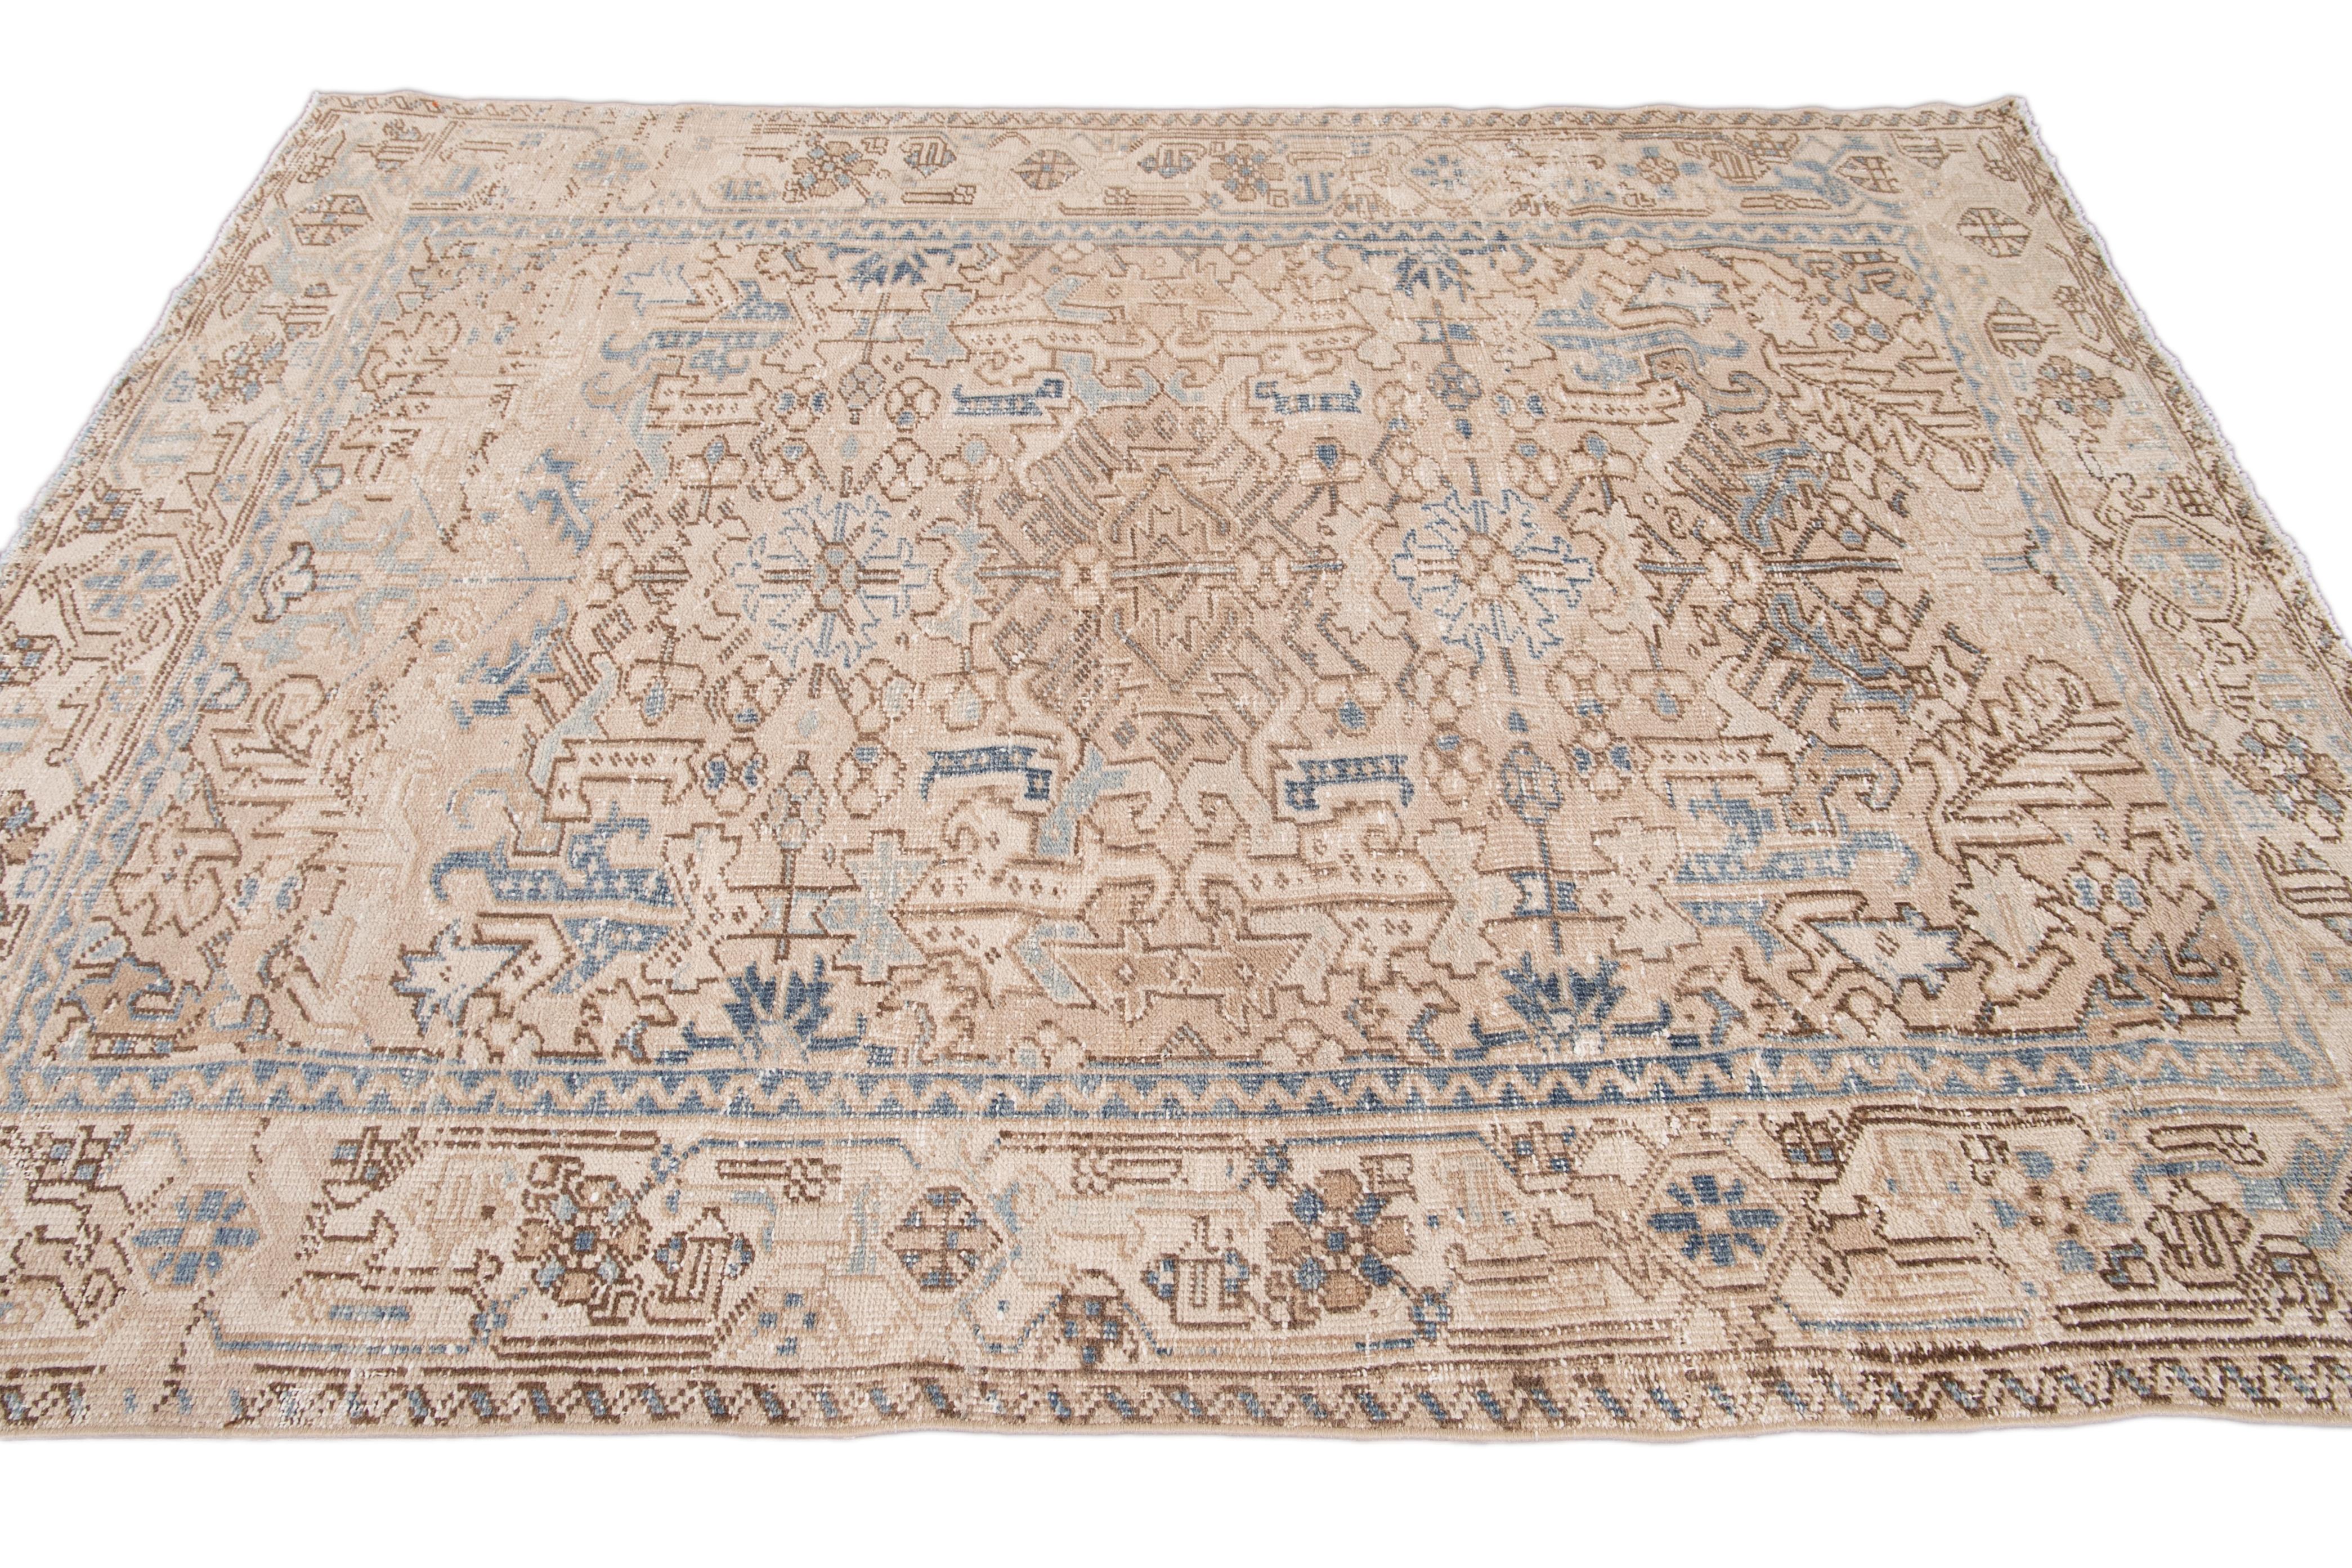 Antique Heriz Handmade Shabby Chic Wool Rug In Distressed Condition For Sale In Norwalk, CT